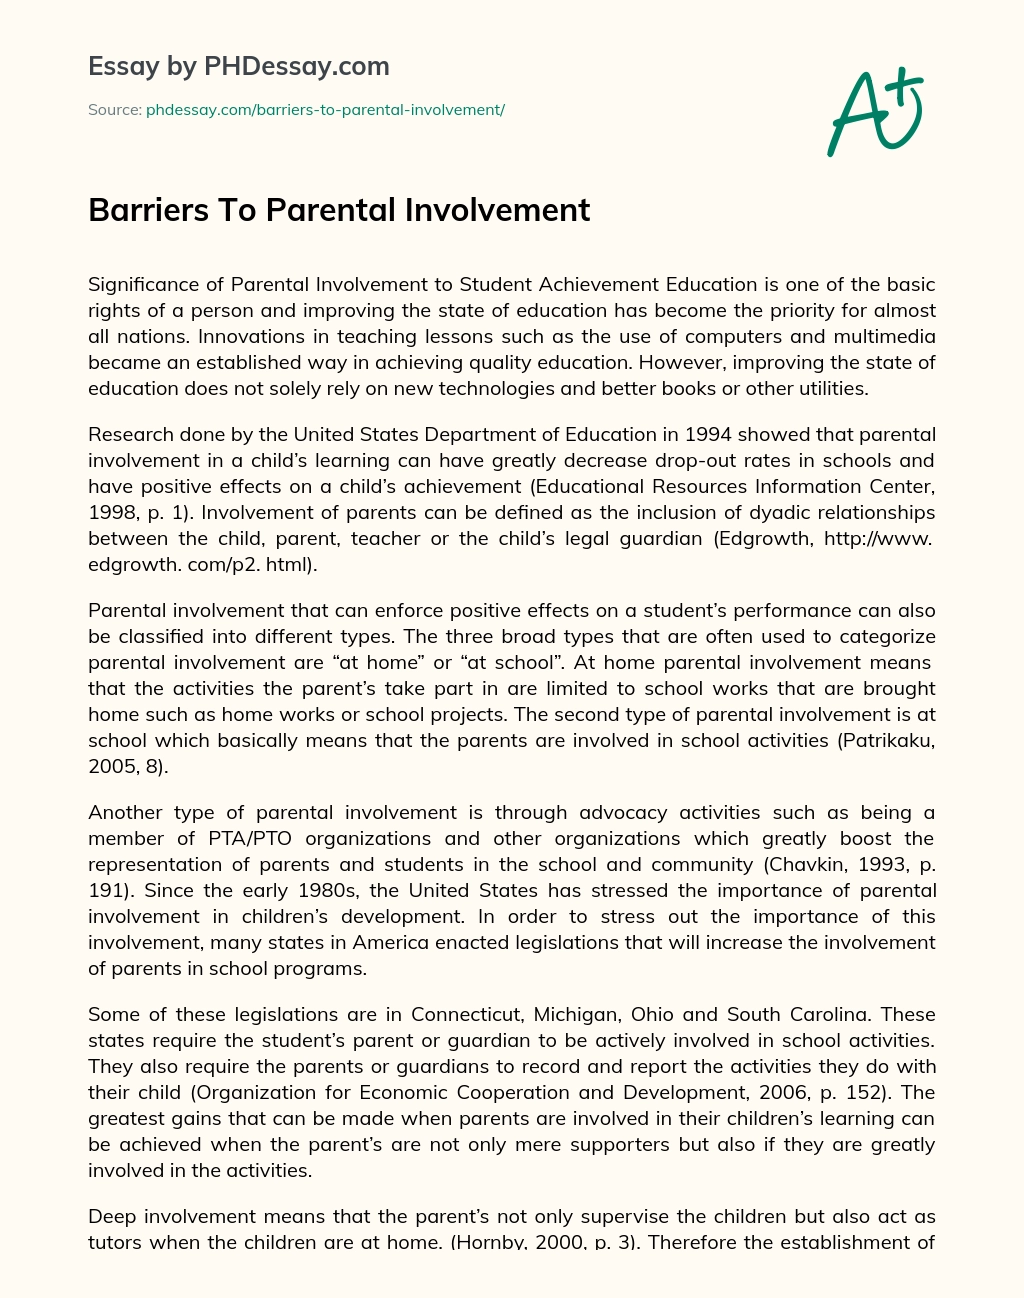 Barriers To Parental Involvement essay